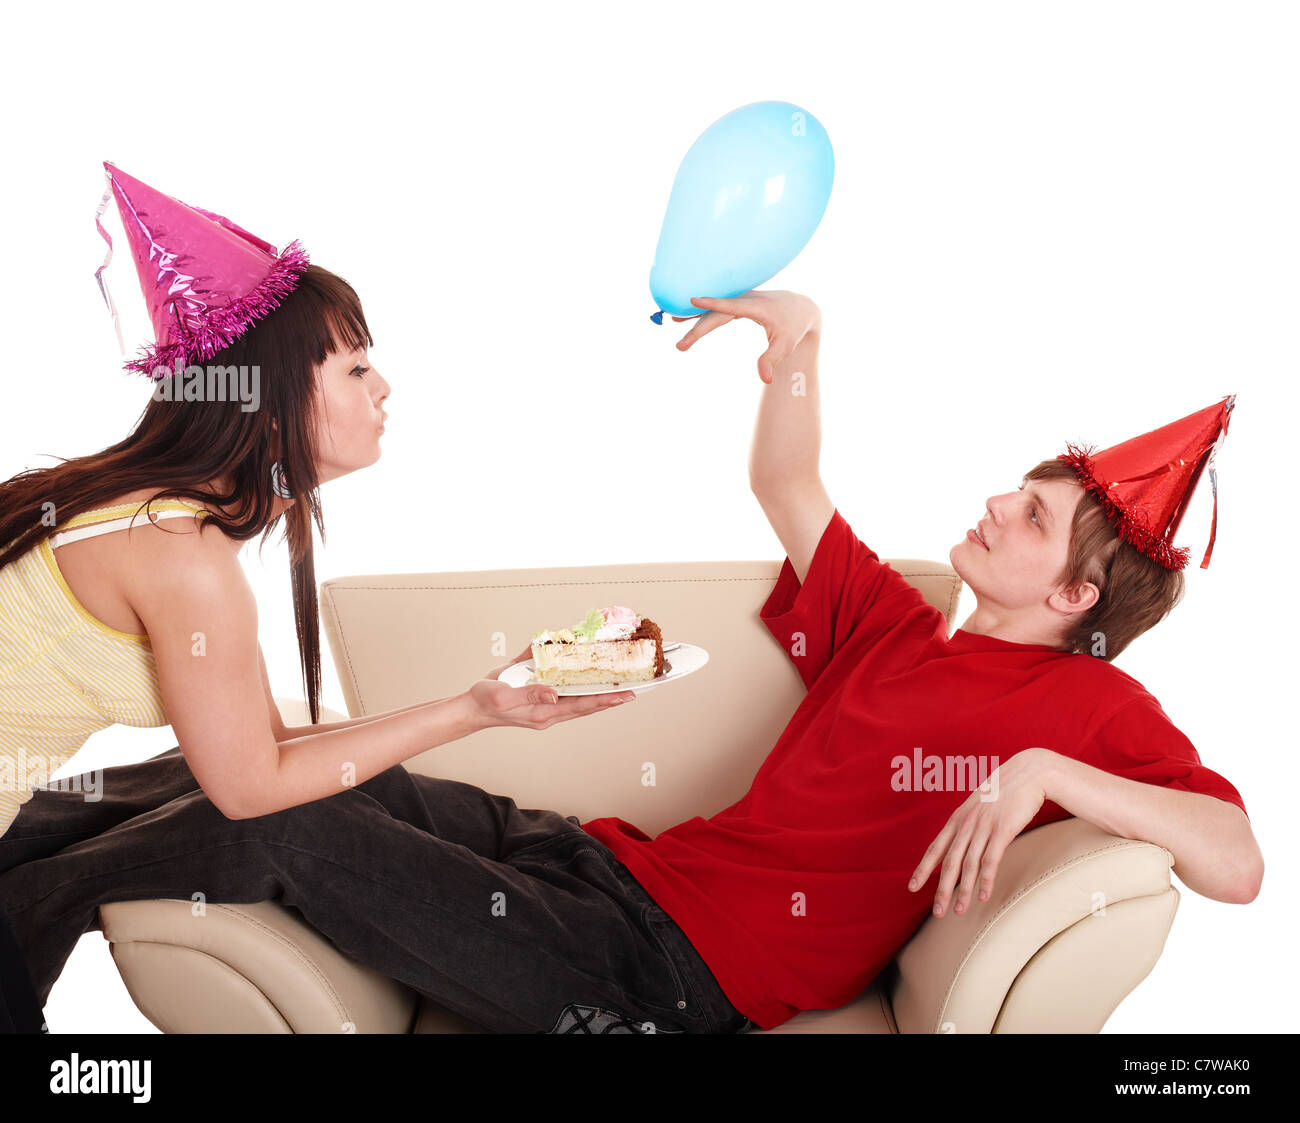 Man in party hat and girl eating cake. Stock Photo